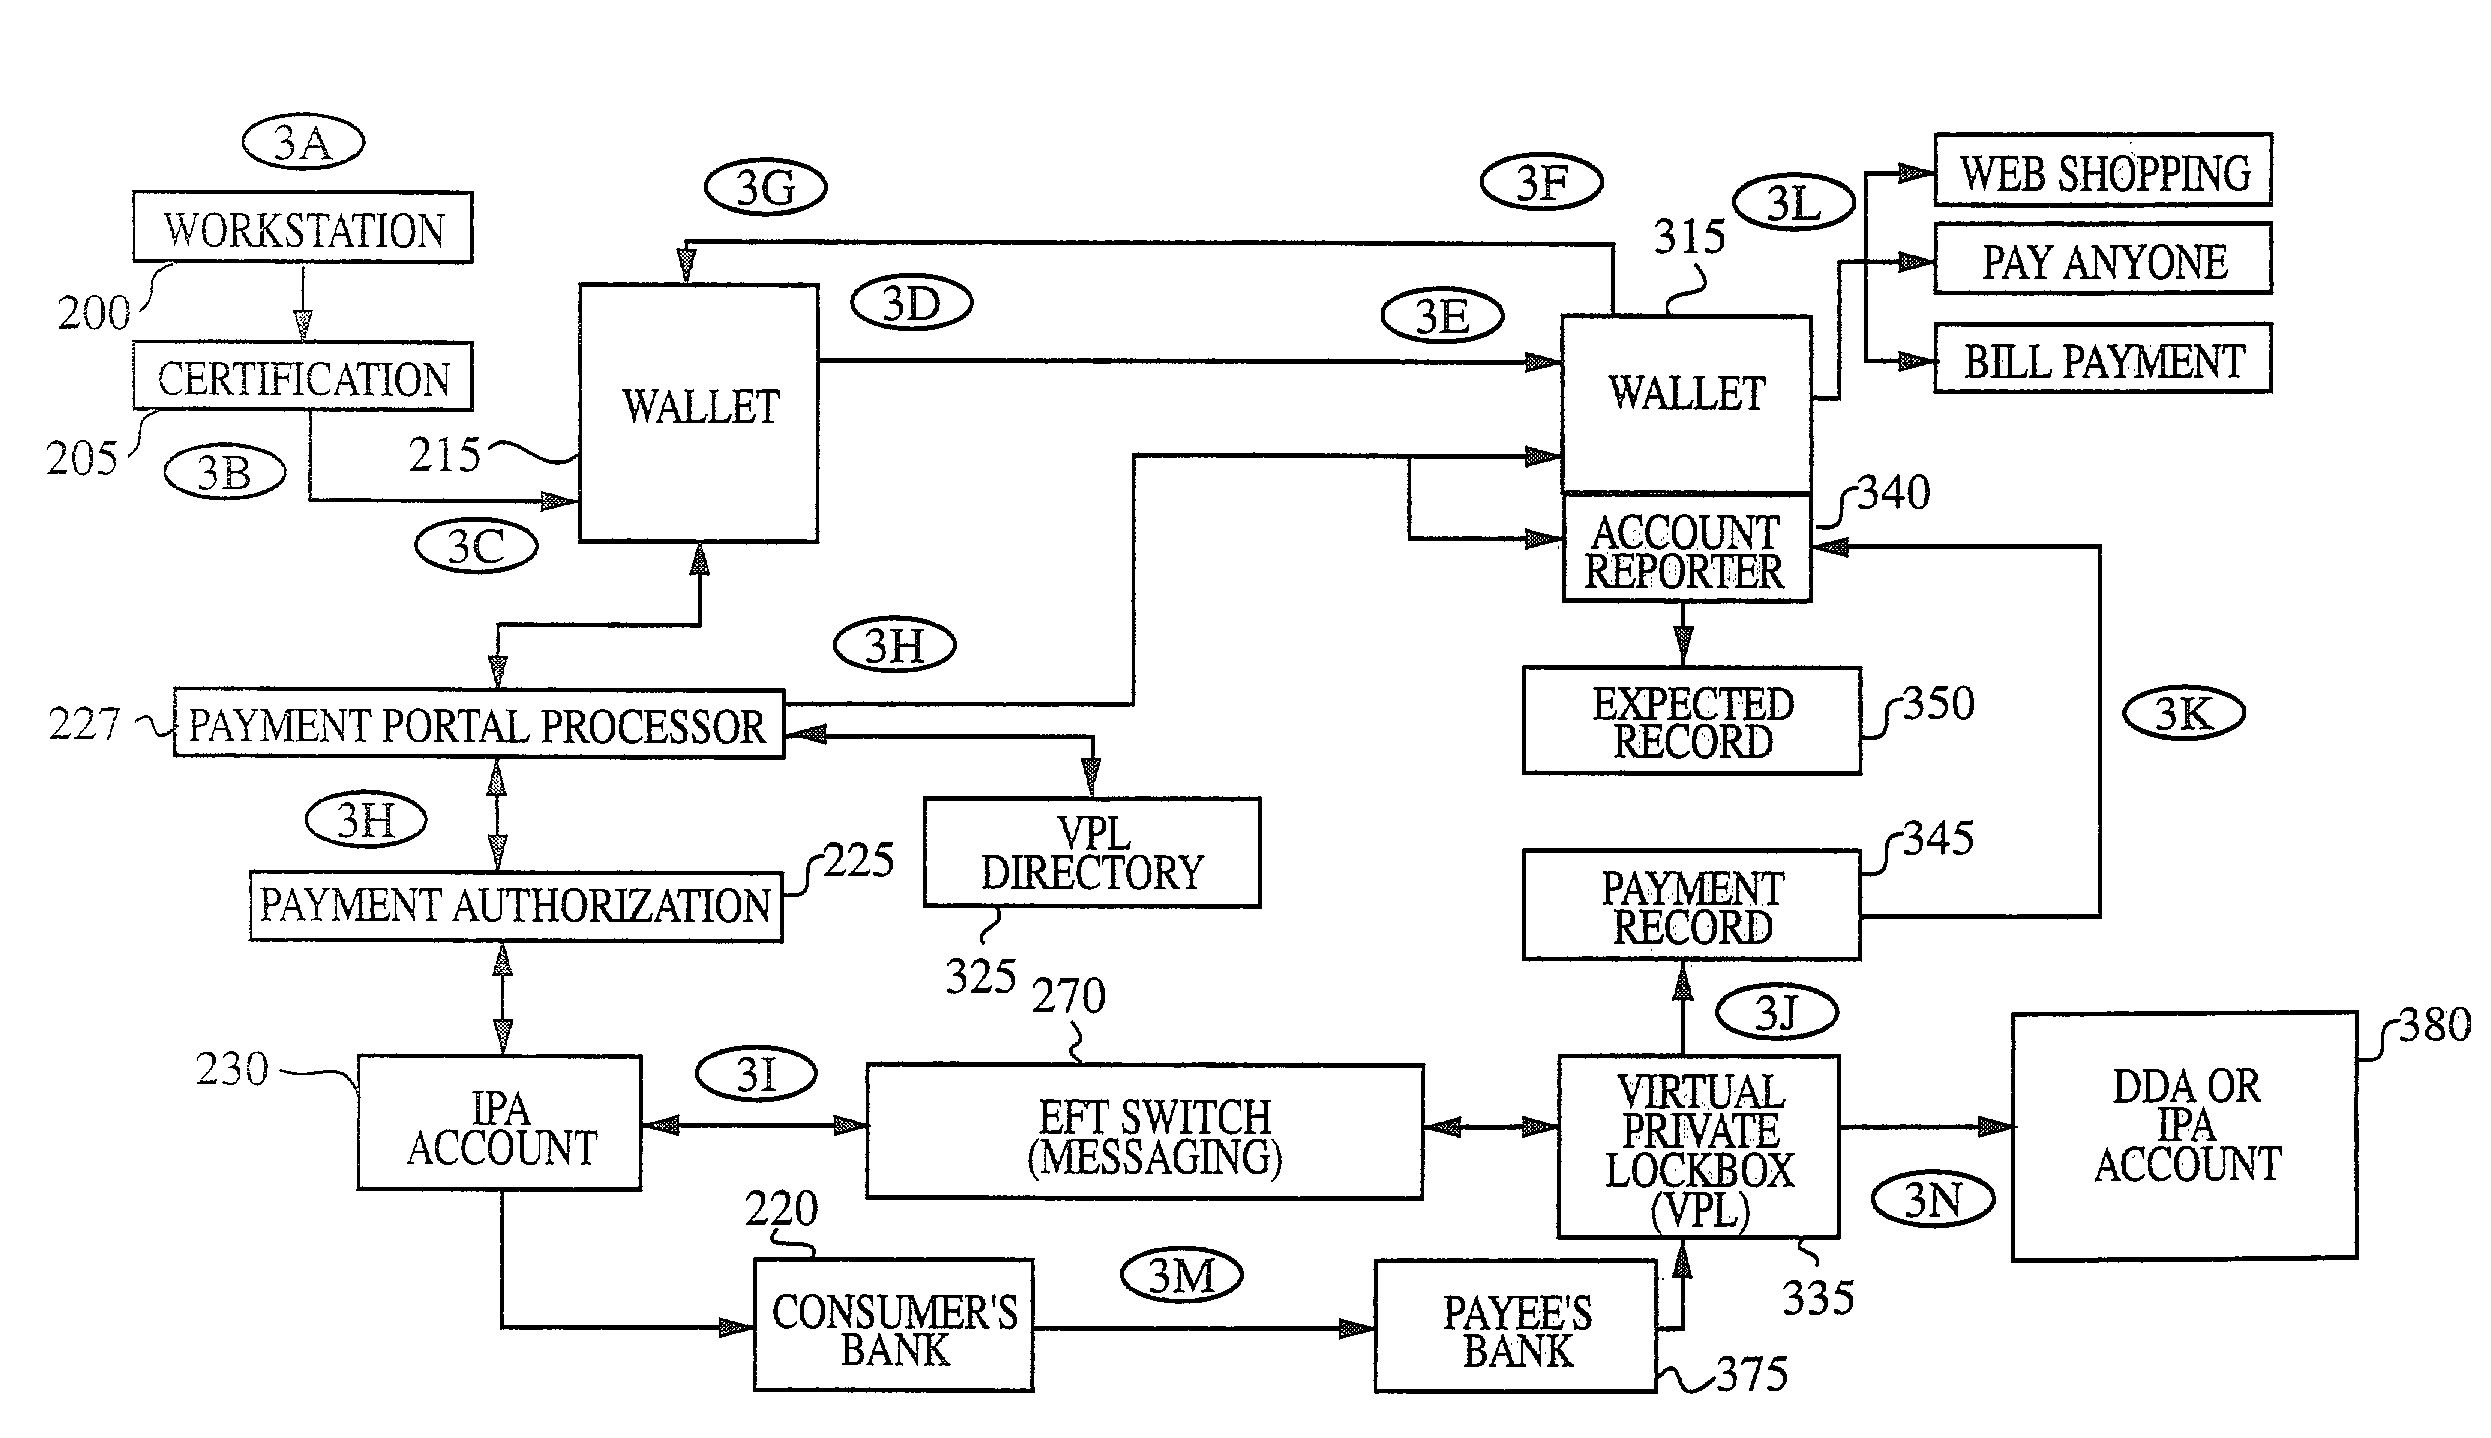 Method and system for processing internet payments using the electronic funds transfer network